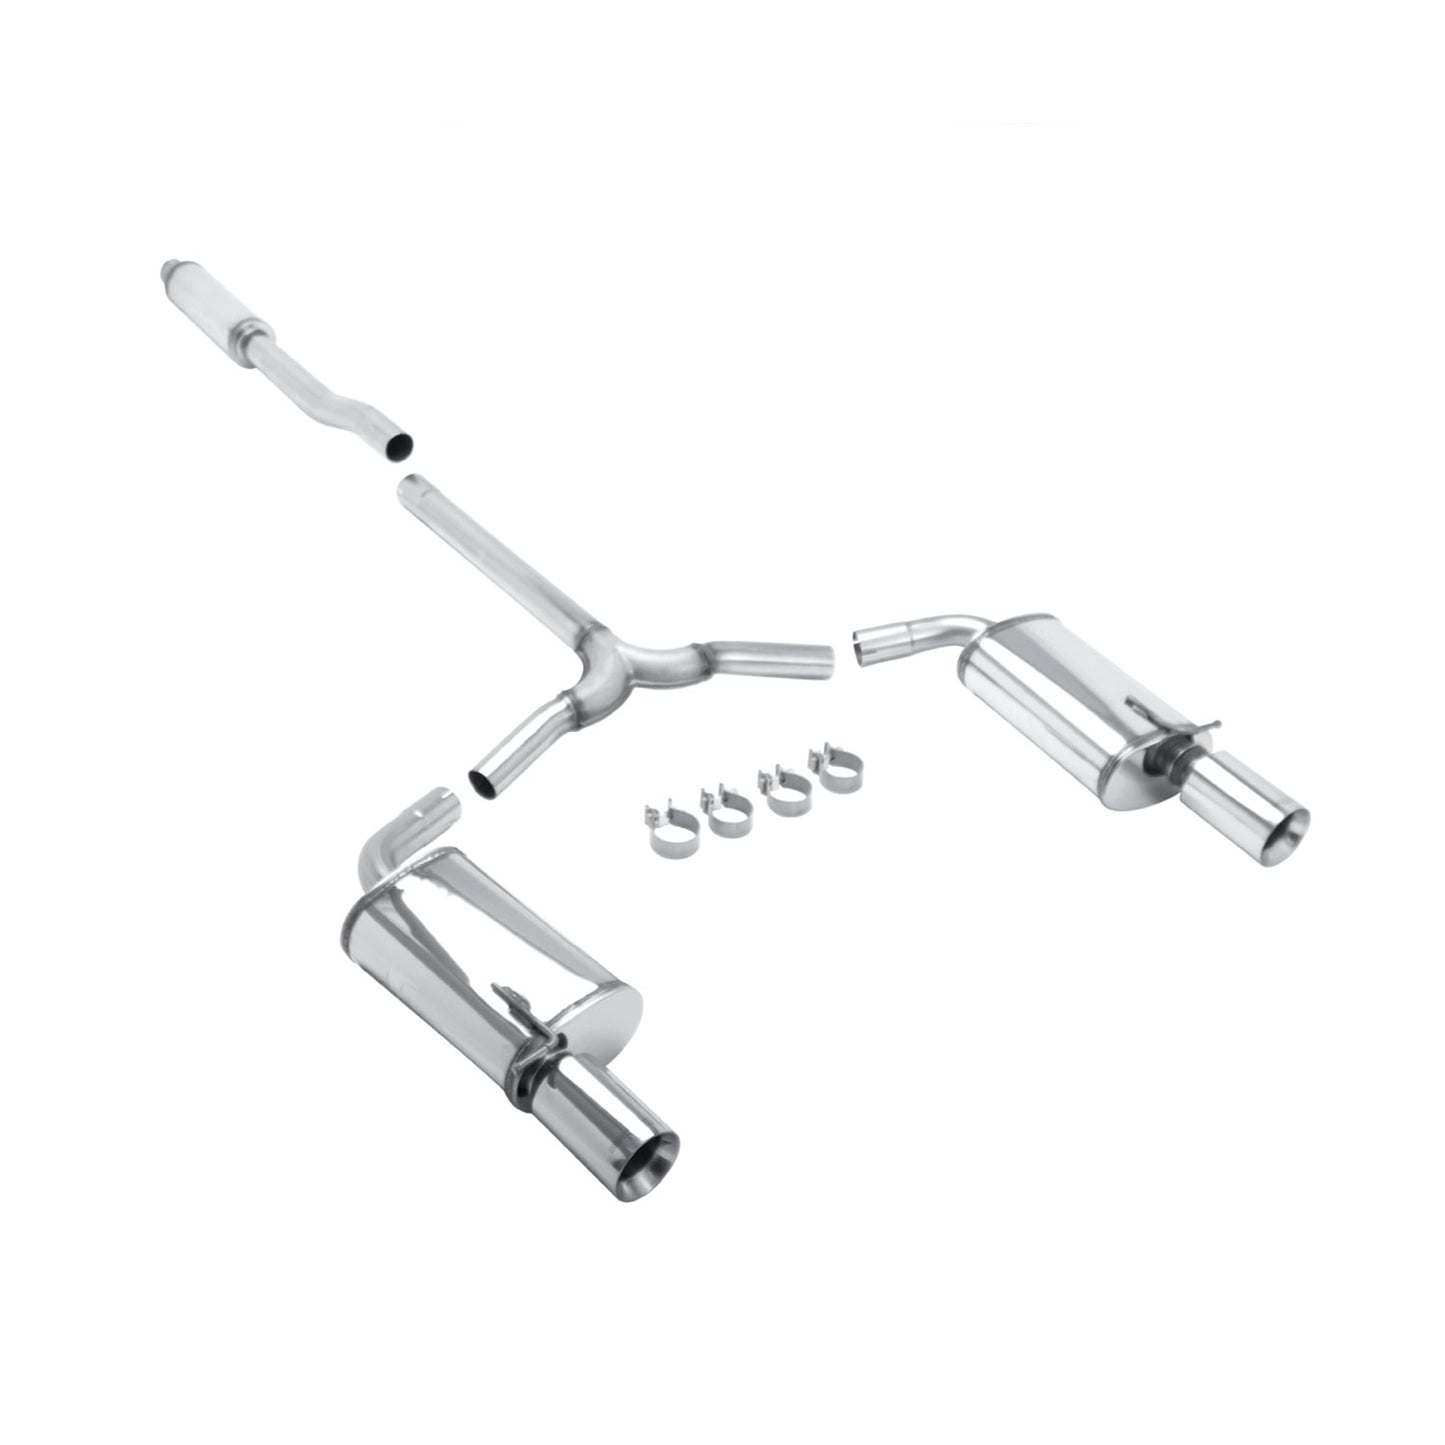 MagnaFlow Touring Series Cat-Back Performance Exhaust System 16855